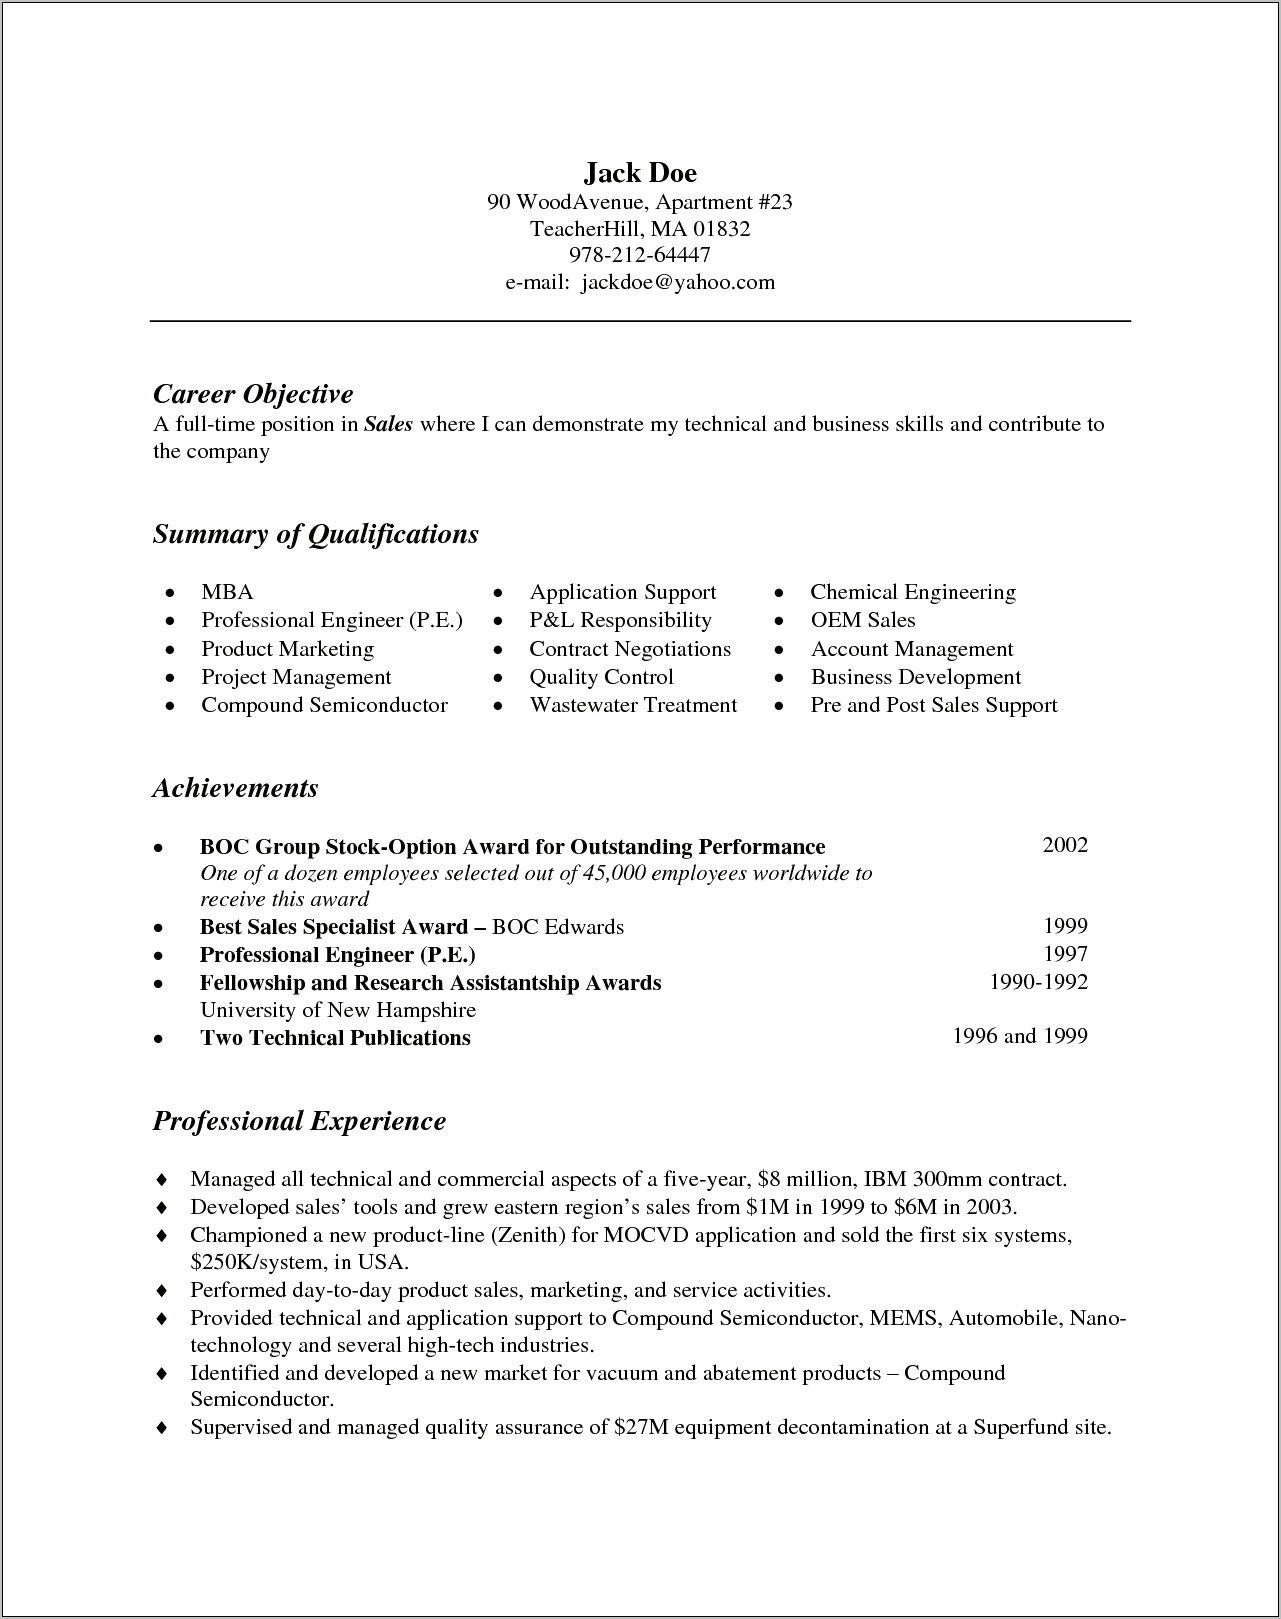 Adding Bullets For Key Skills On A Resume